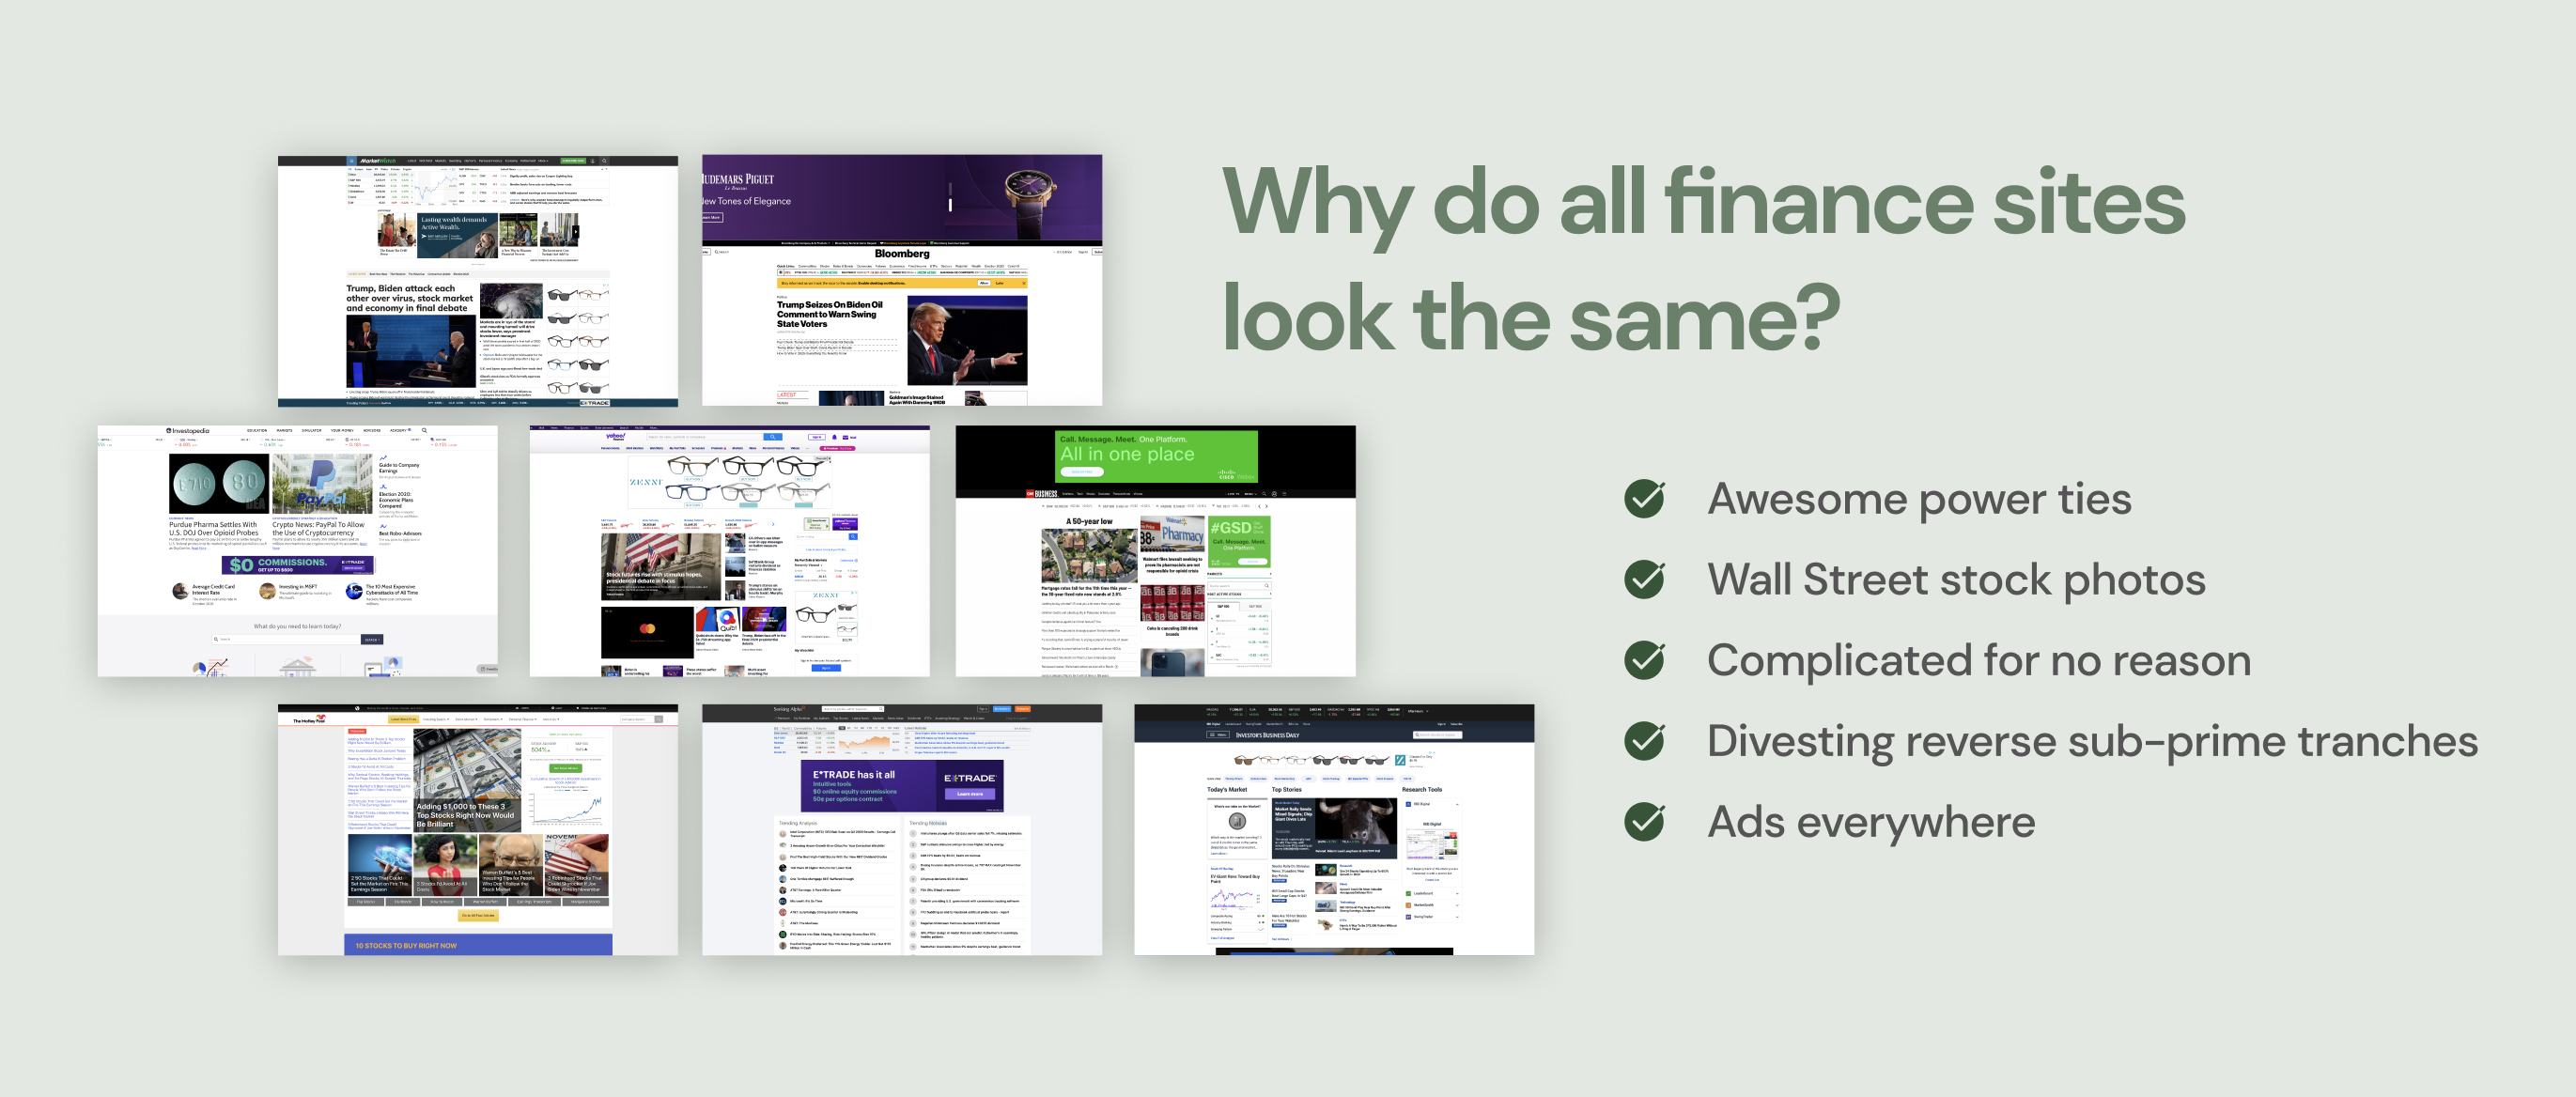 why do all finance sites look the same?